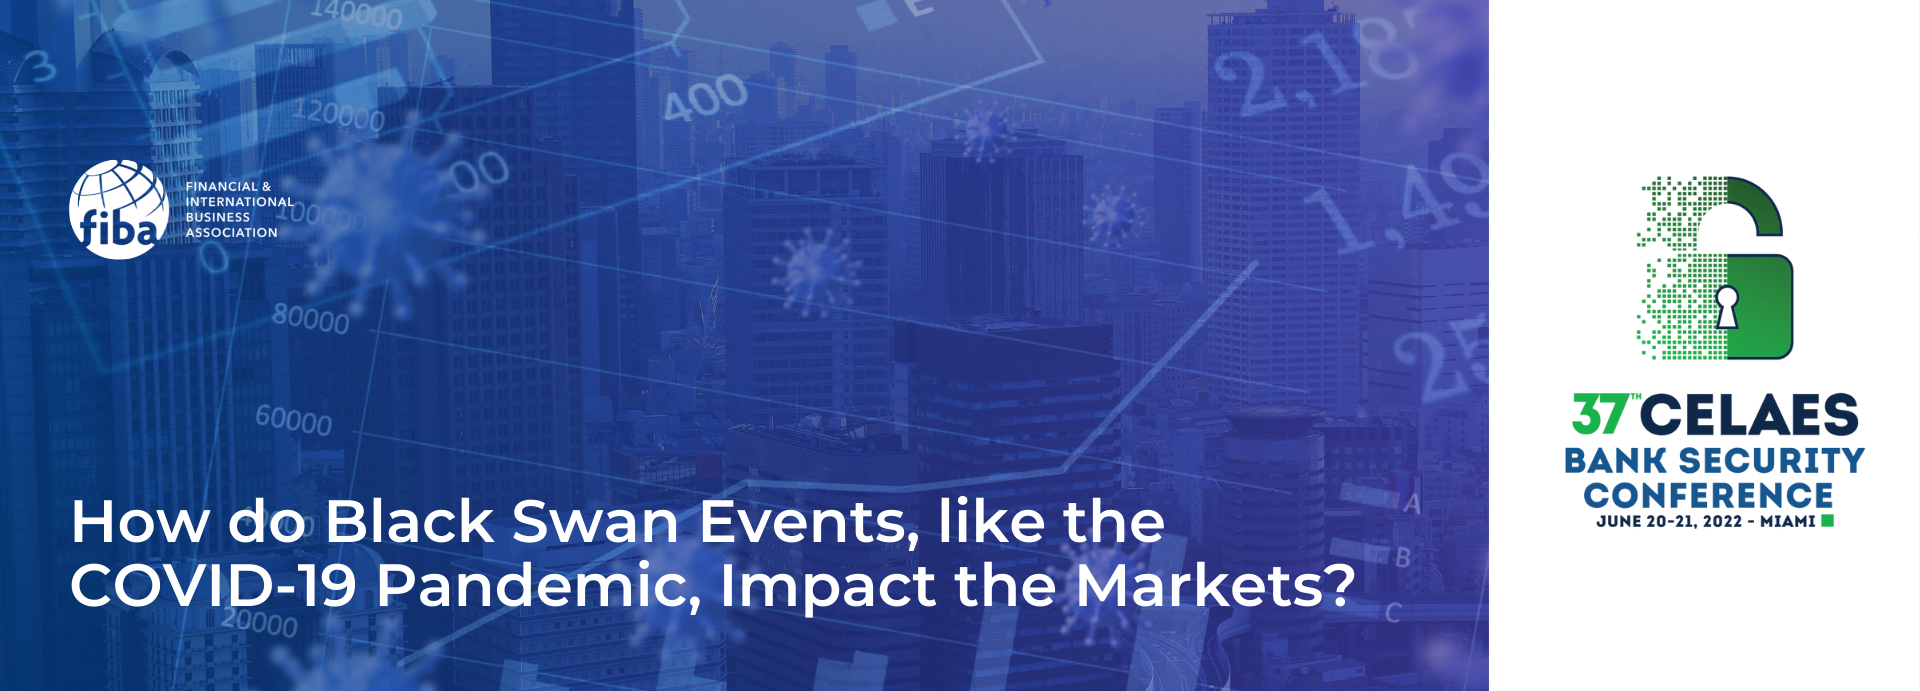 How do Black Swan Events, like the COVID-19 Pandemic, Impact the Markets?